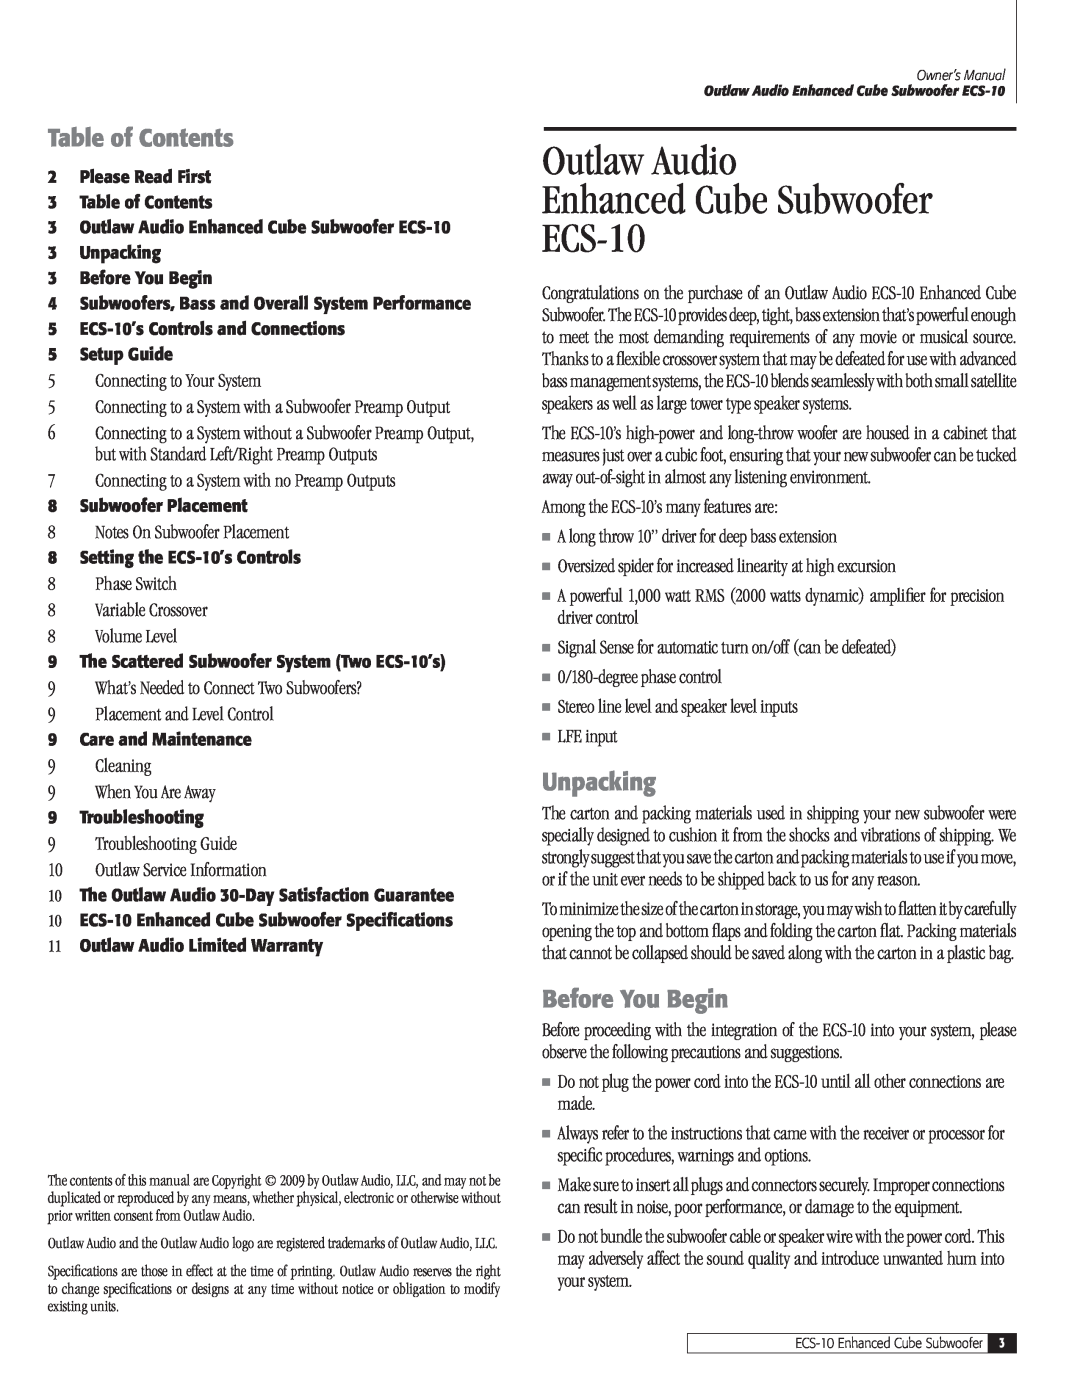 Outlaw Audio owner manual Table of Contents, Unpacking, Before You Begin, Outlaw Audio Enhanced Cube Subwoofer ECS-10 